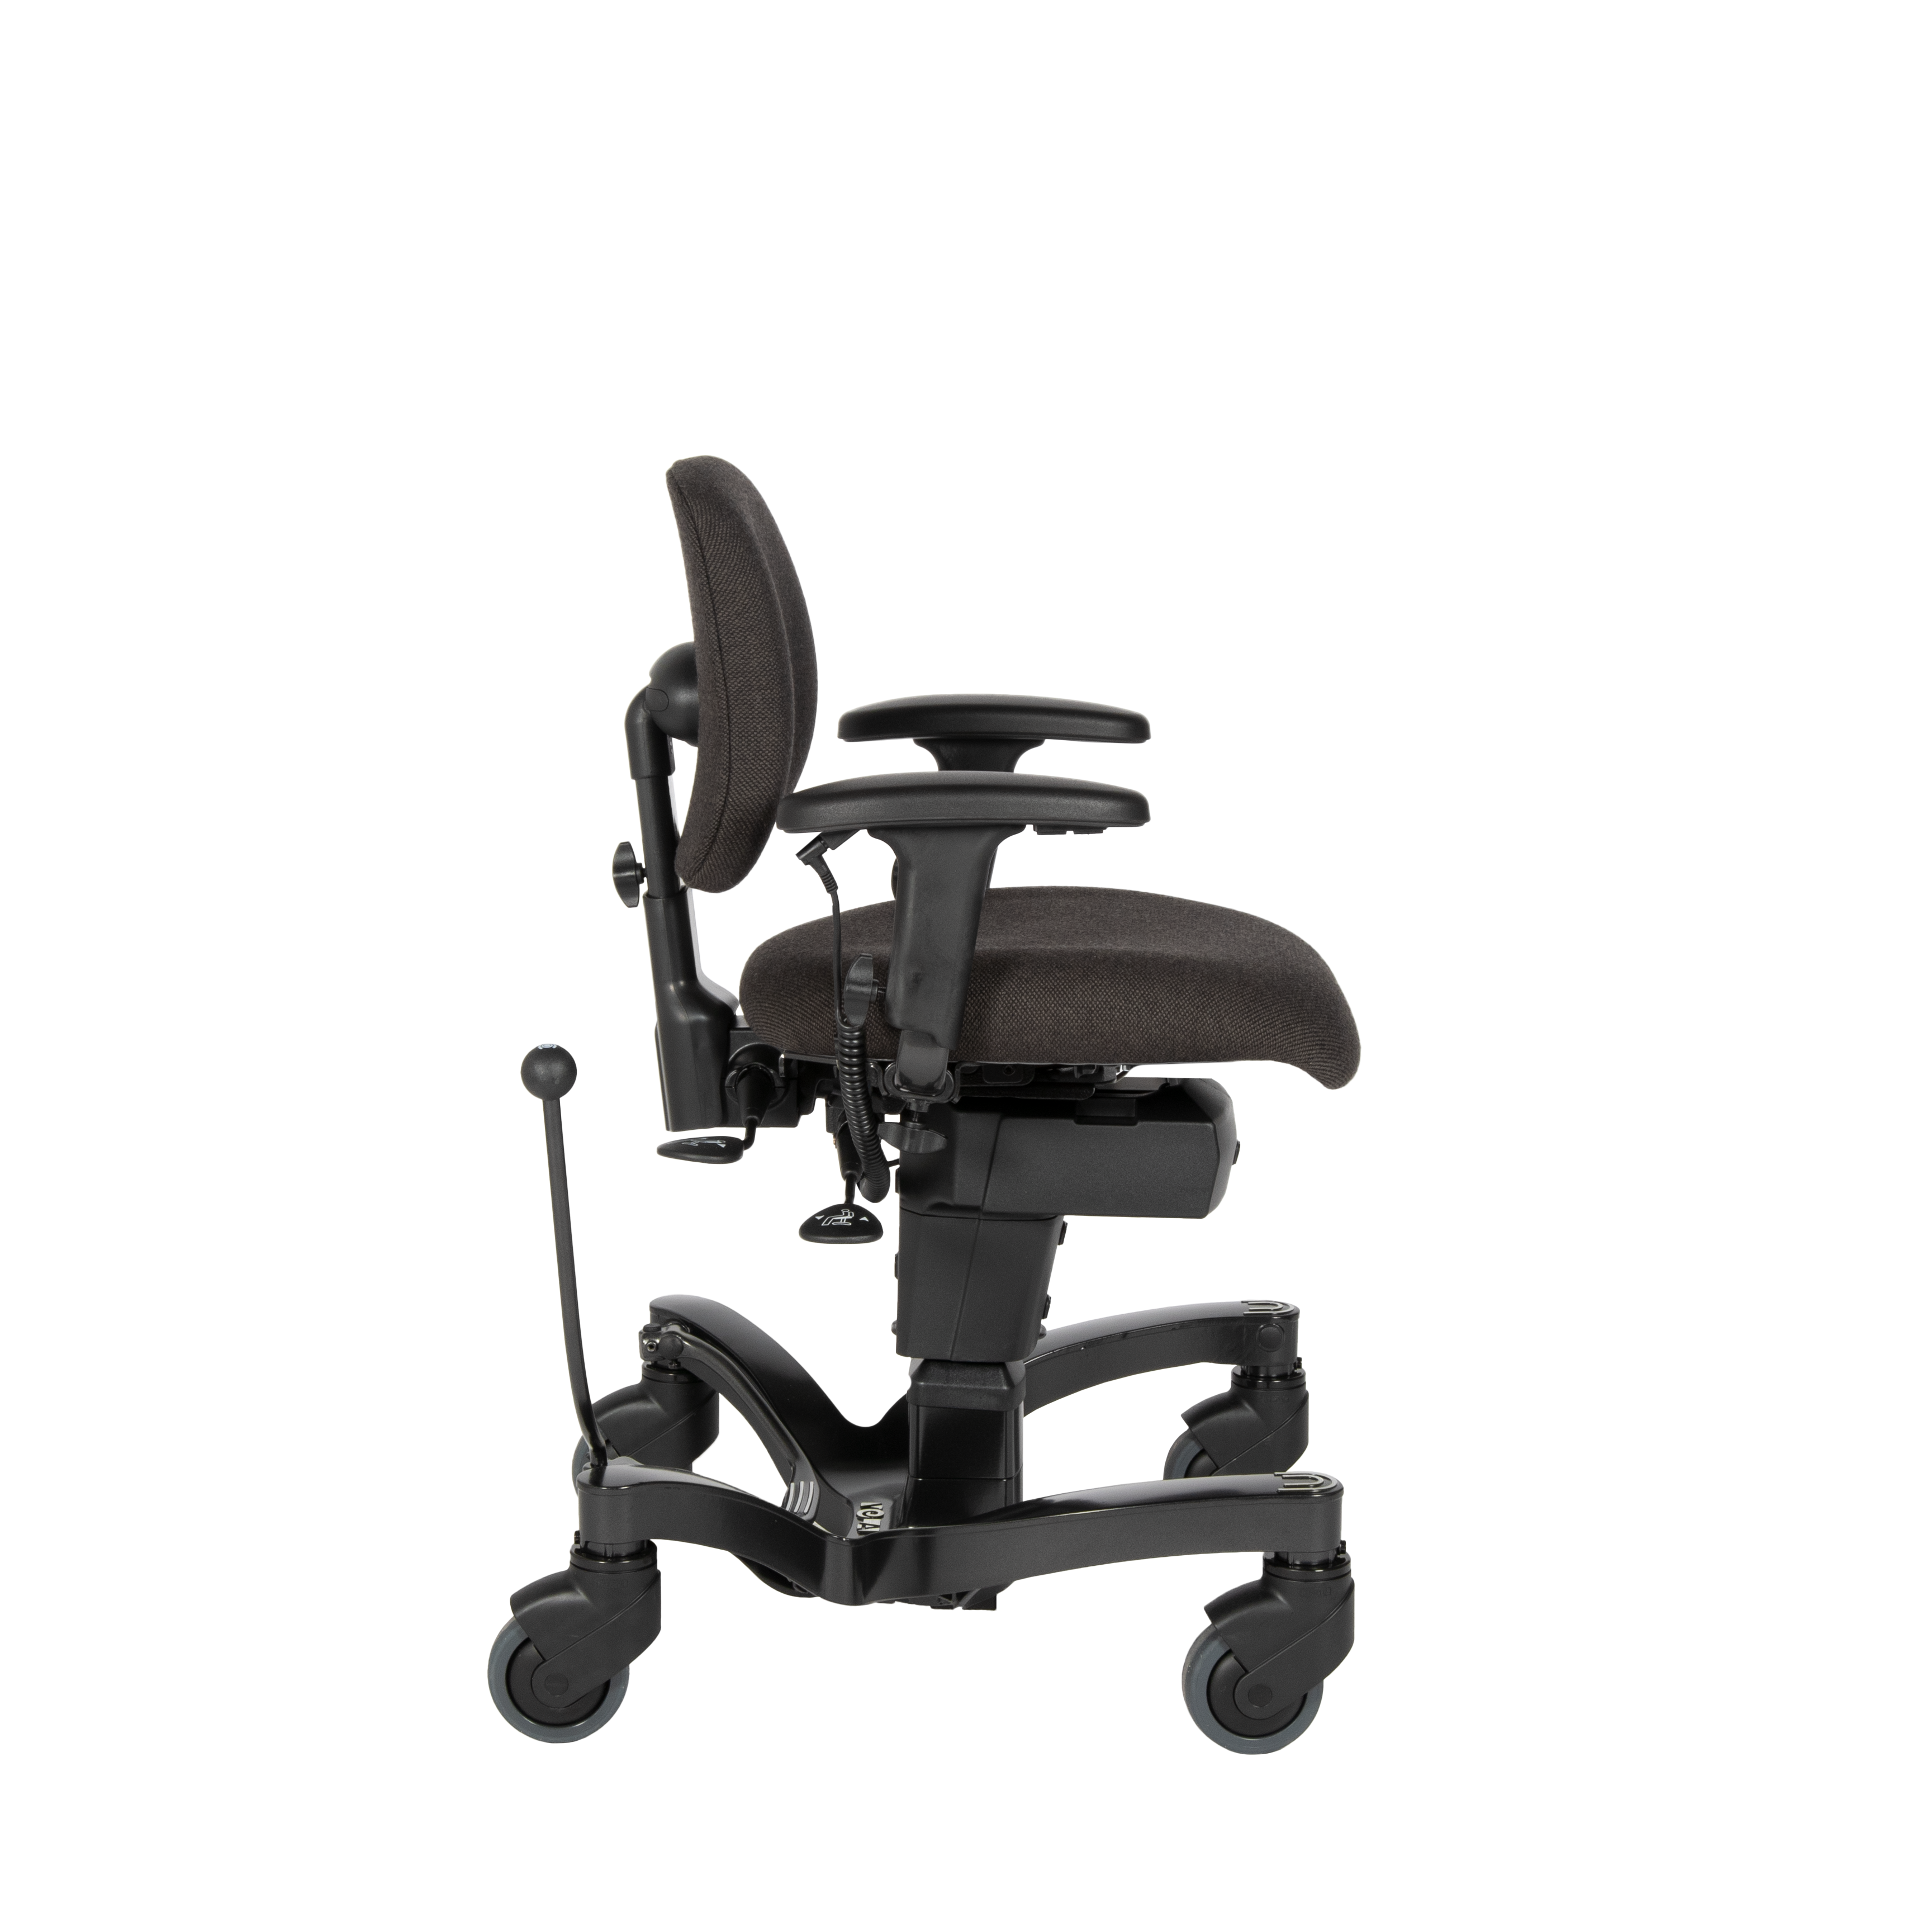 Vela tango 700e with active backrest in medium right side image